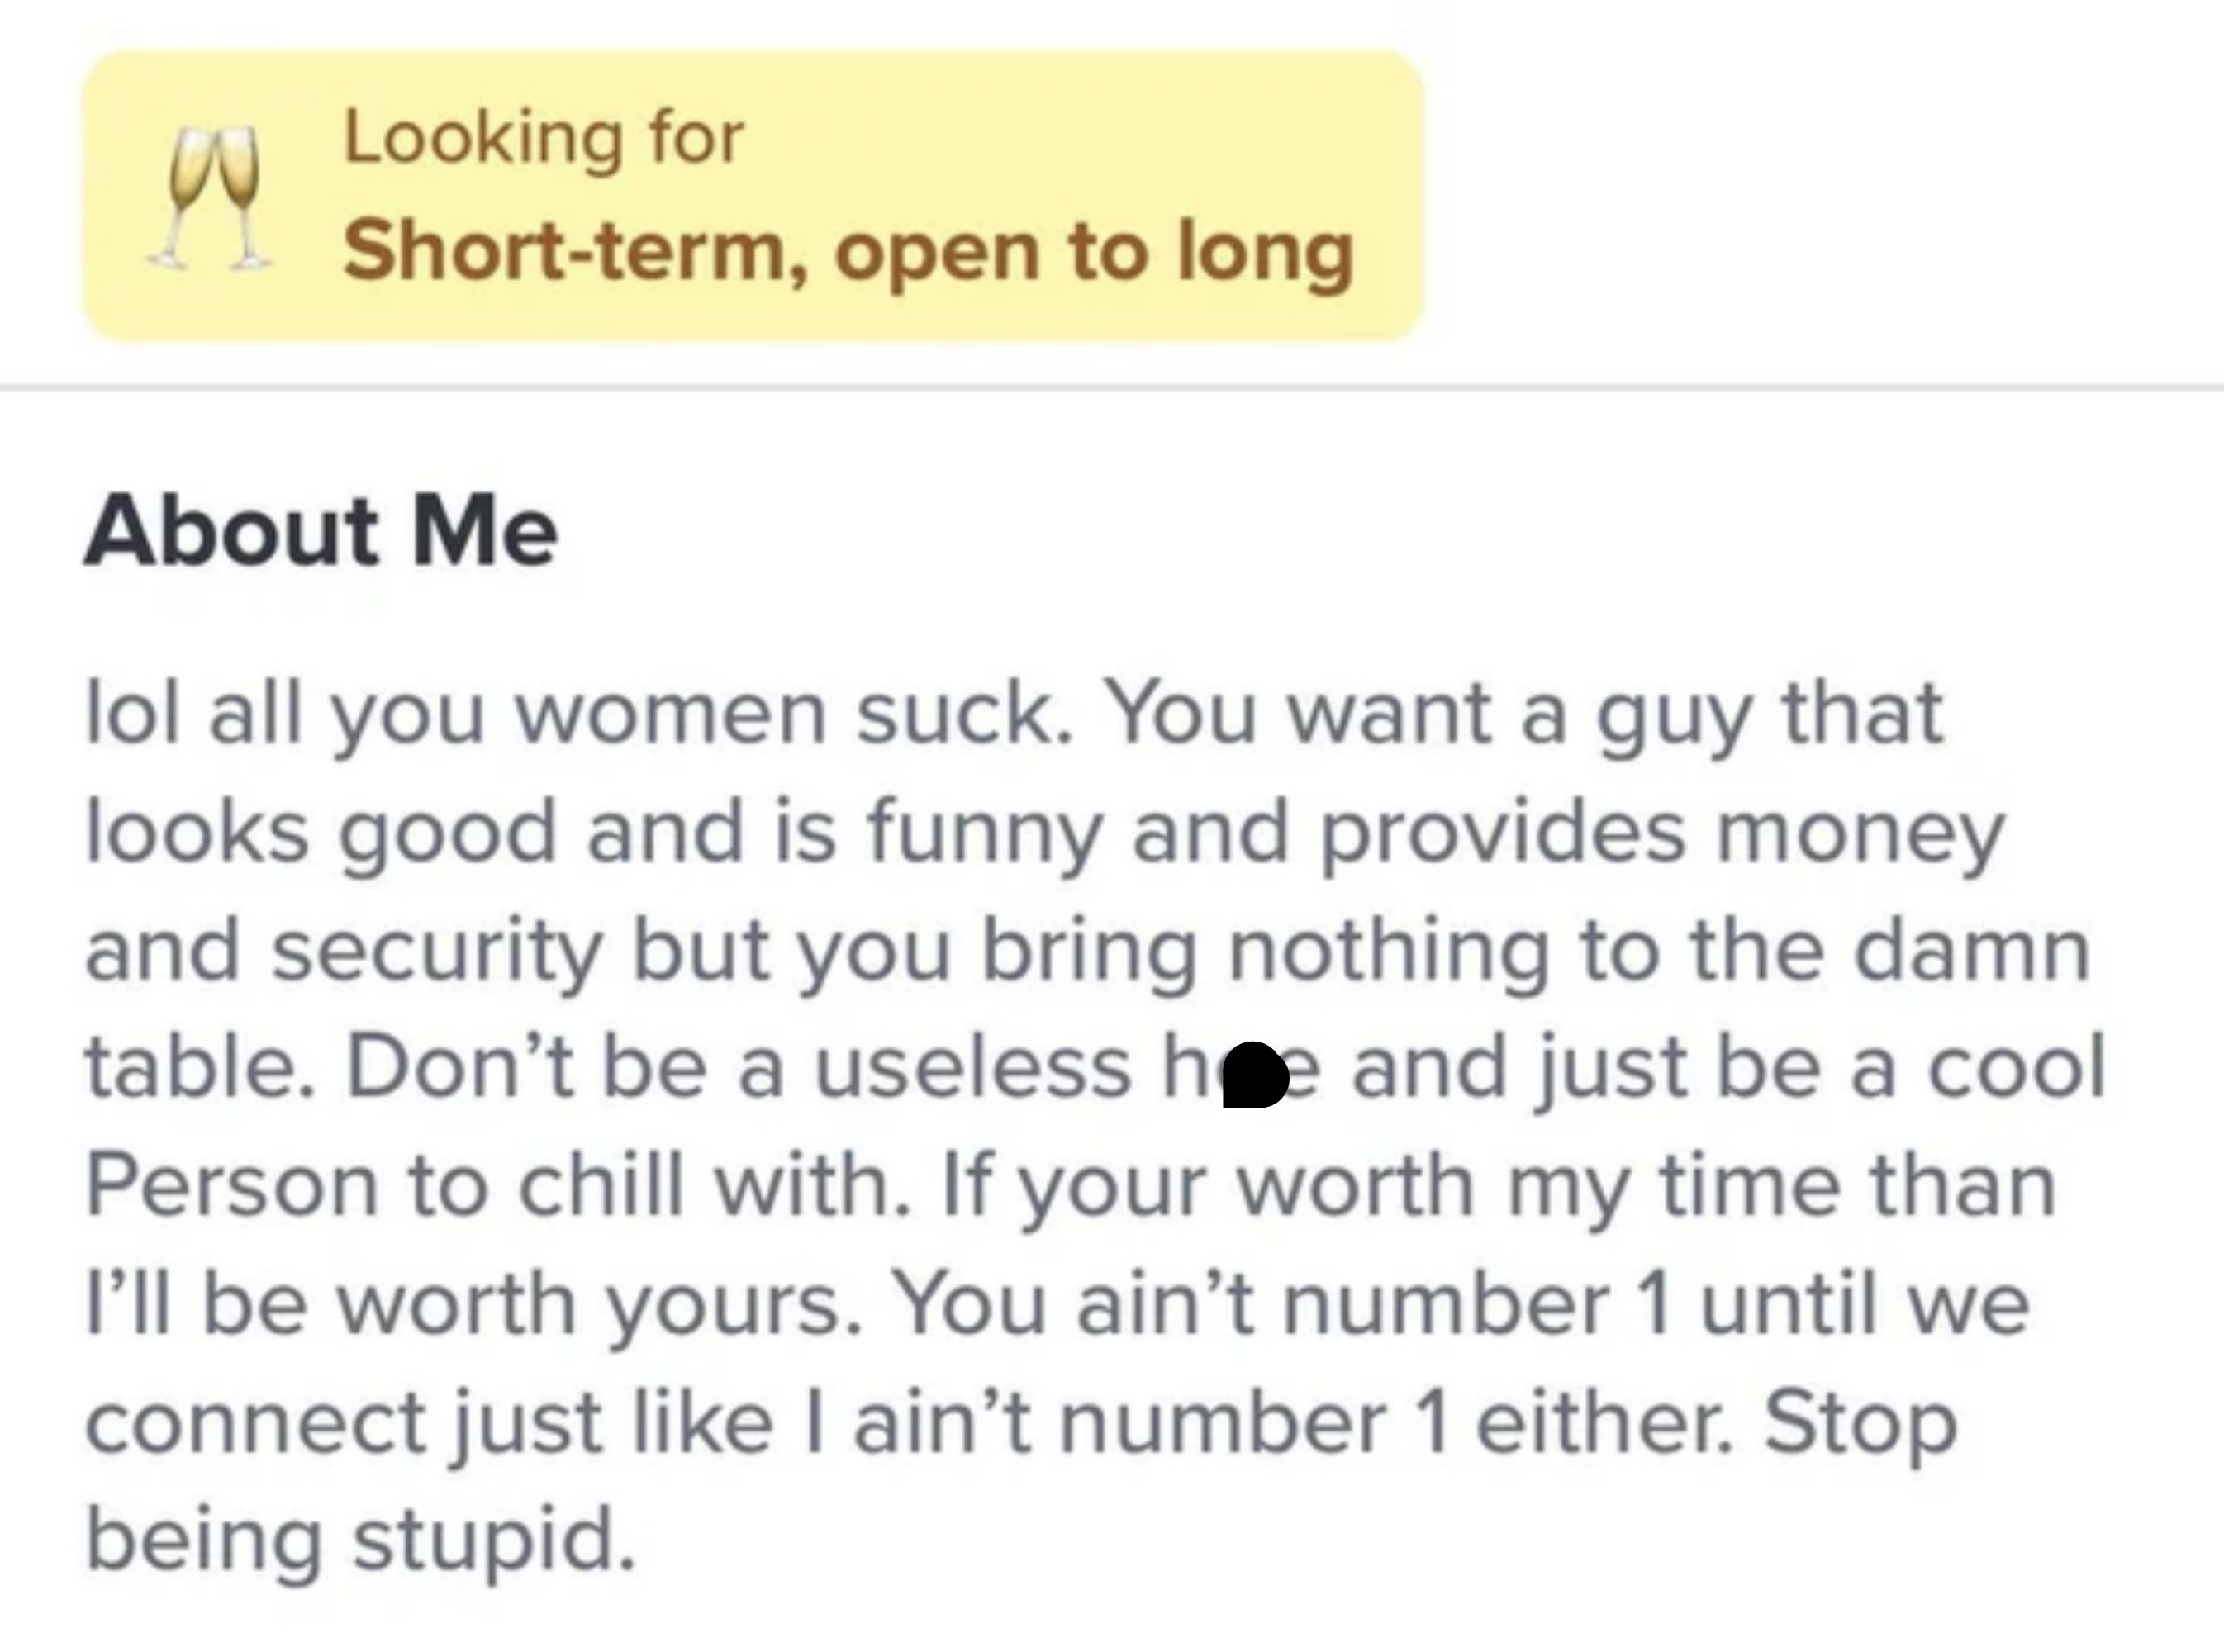 Another misogynistic About Me section, this one says &quot;All you women suck, you want a guy that looks good and is funny and provides money and security but you bring nothing to the damn table&quot;